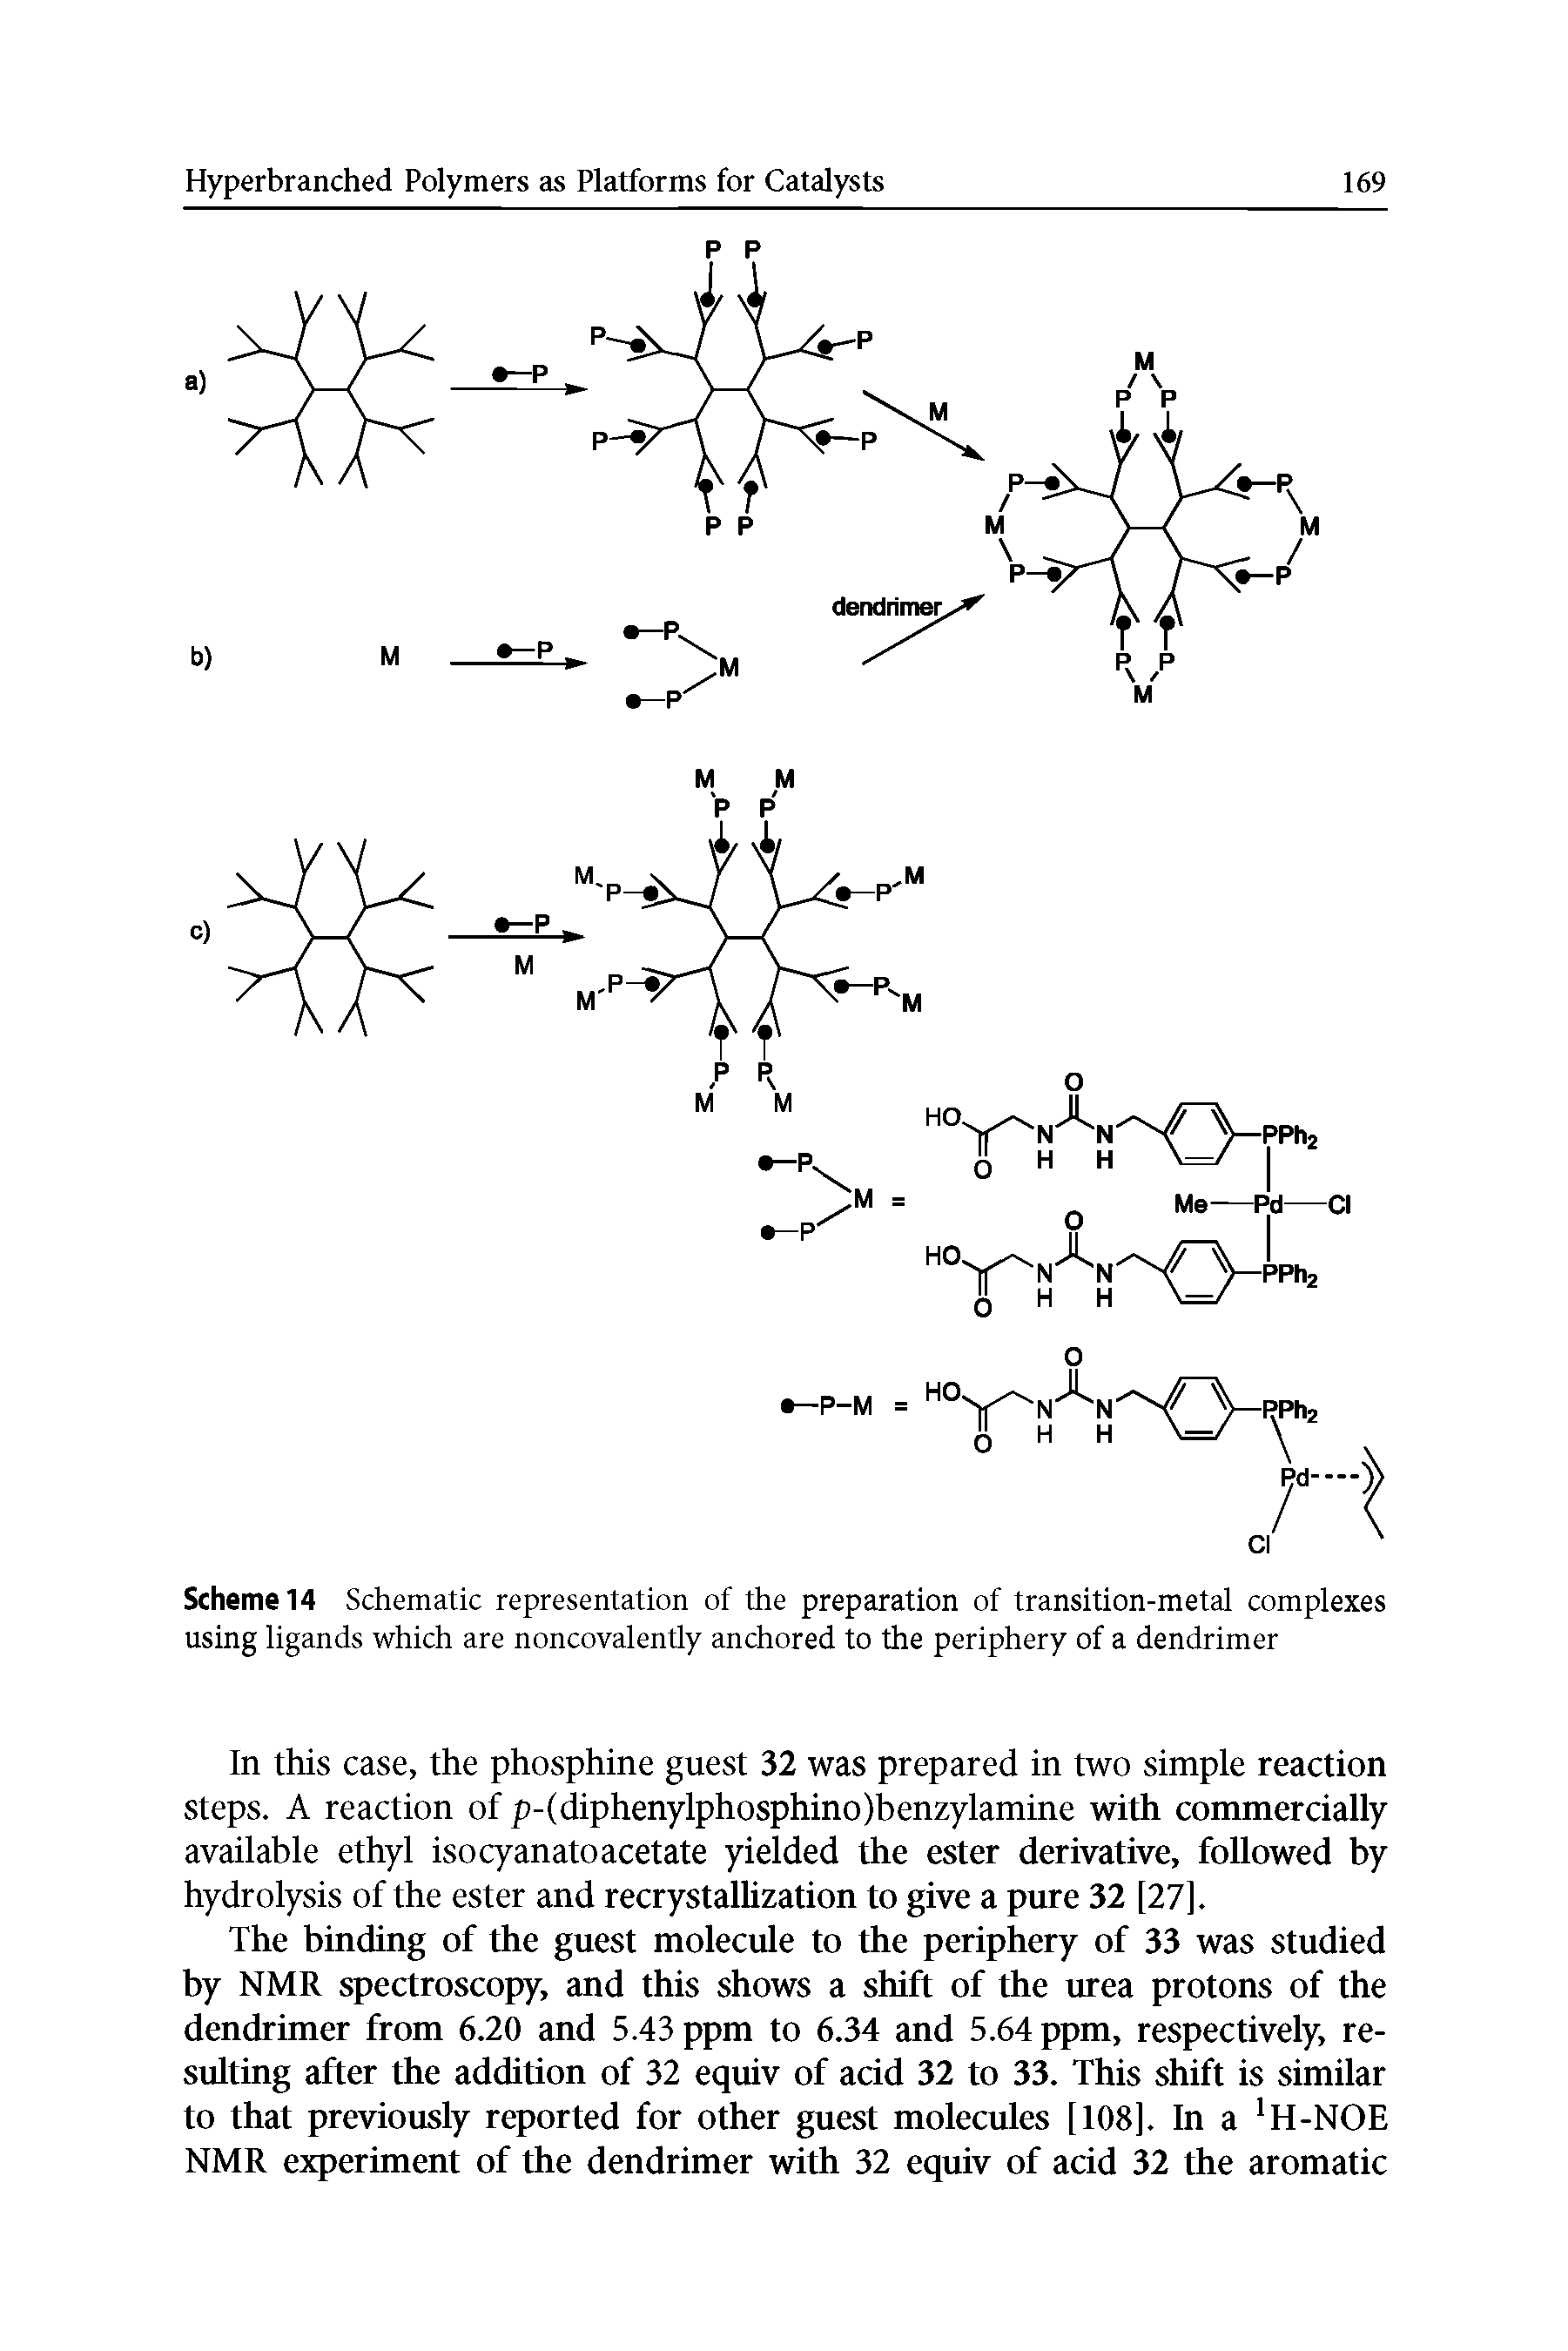 Scheme 14 Schematic representation of the preparation of transition-metal complexes using ligands which are noncovalently anchored to the periphery of a dendrimer...